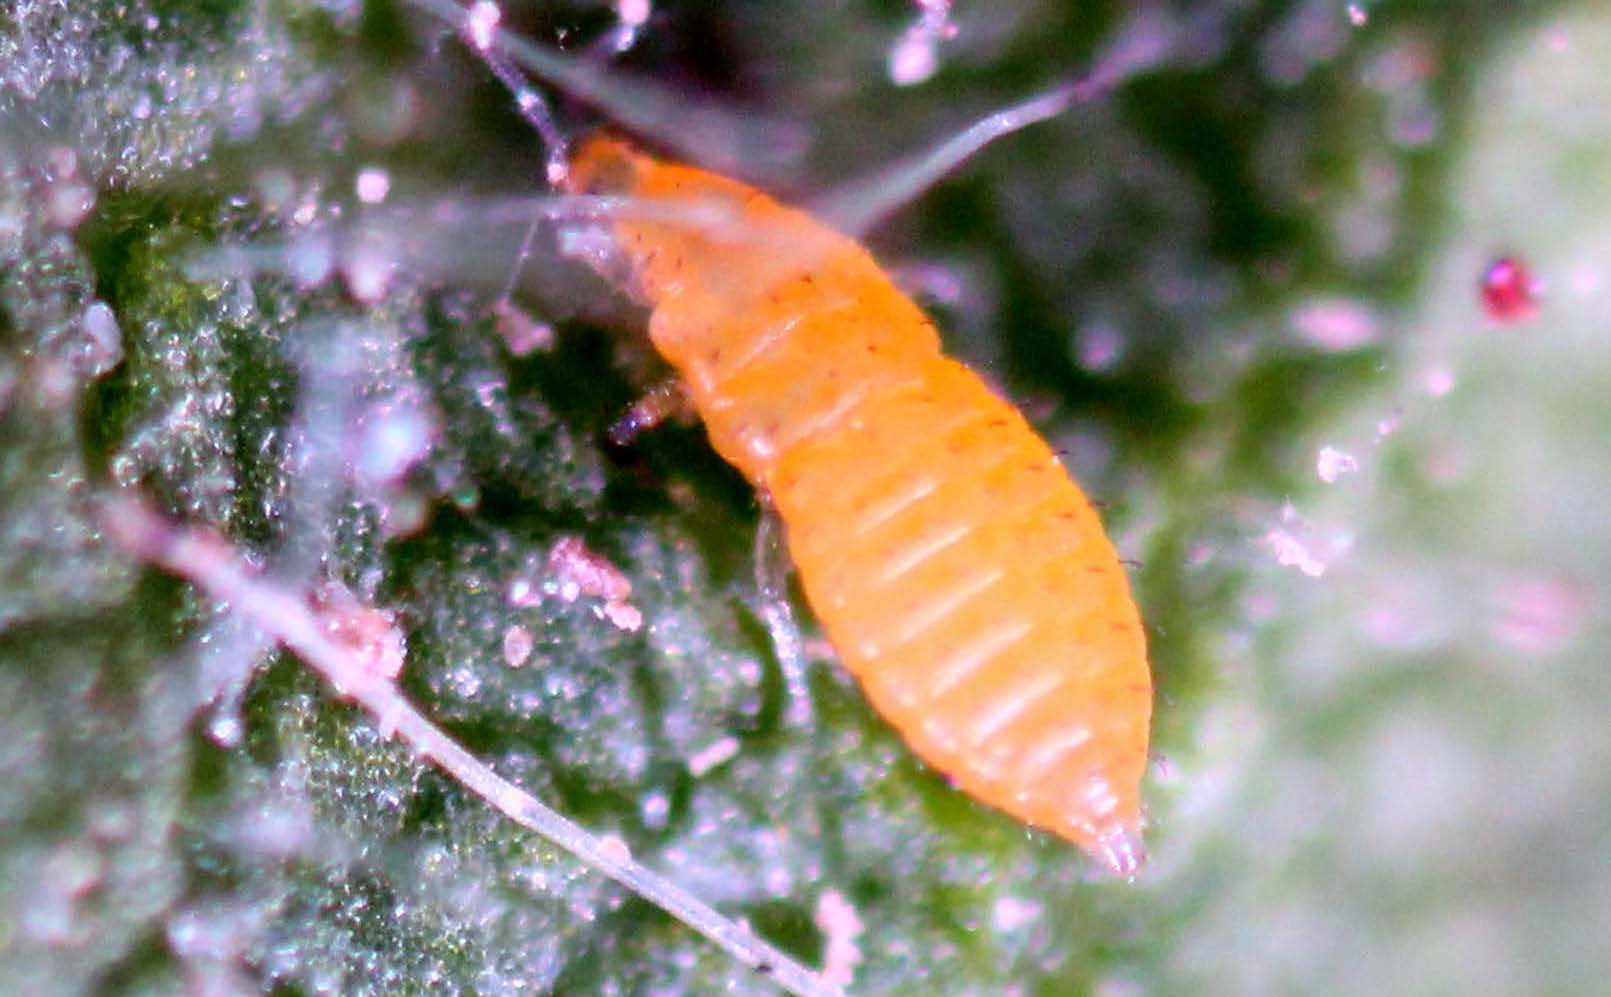 Thrips nymphs acquire Soybean vein necrosis virus when feeding on infected plants.